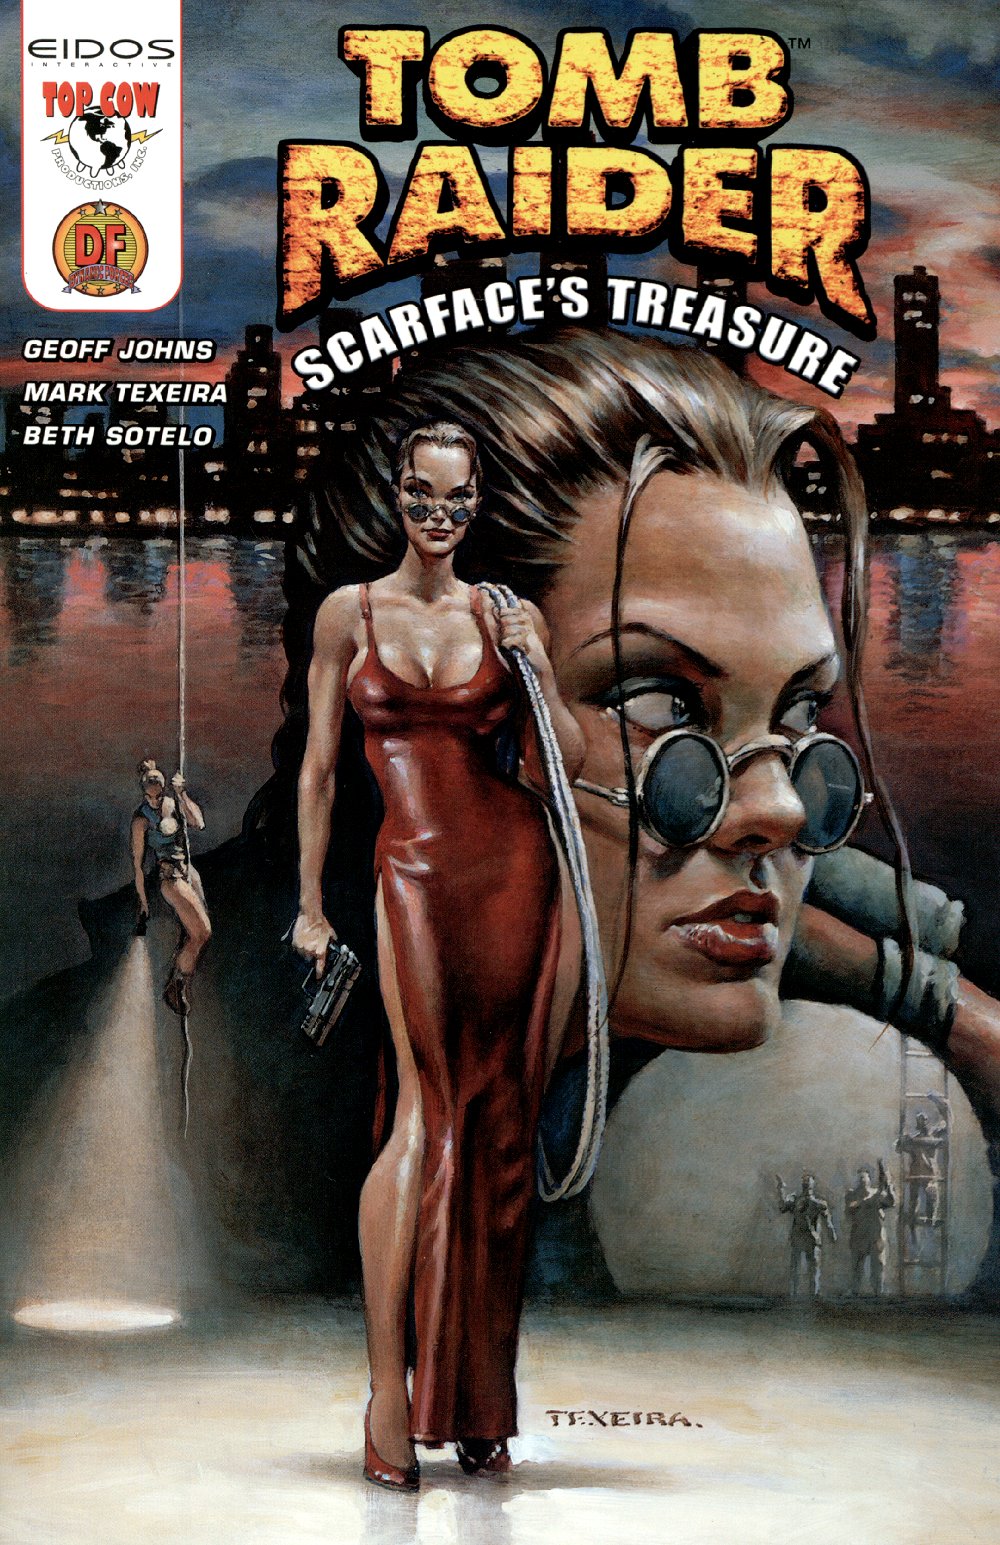 Read online Tomb Raider: Scarface's Treasure comic -  Issue # Full - 1